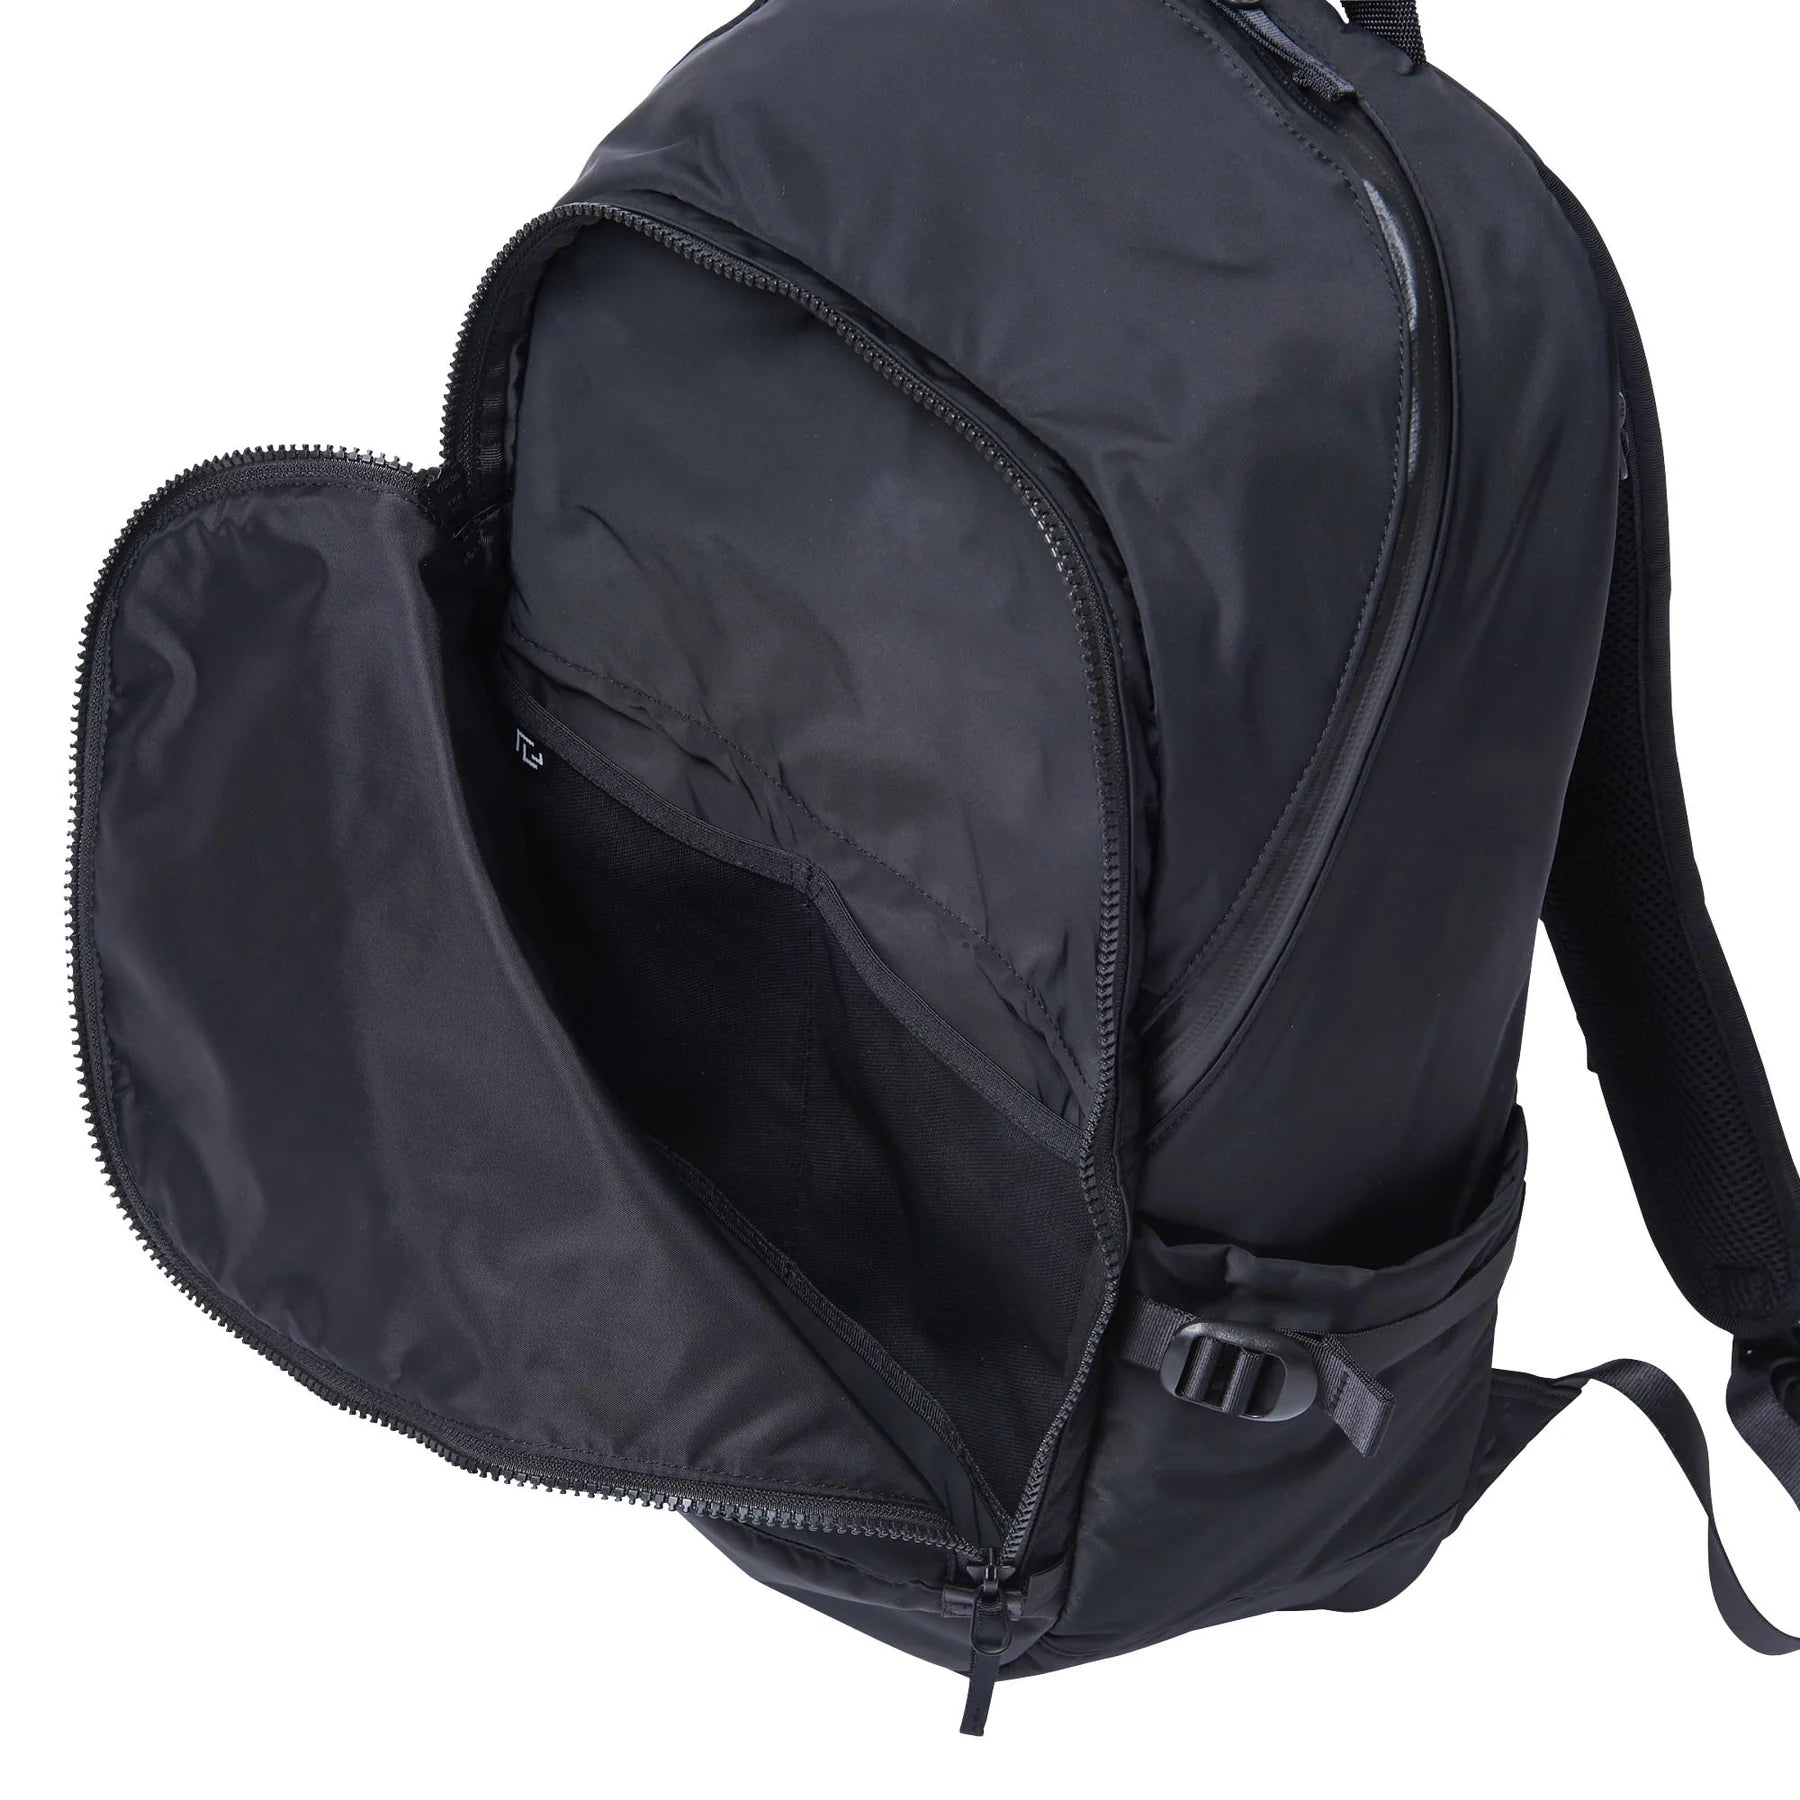 RAMIDUS / “BLACK BEAUTY by fragment” BACKPACK (M)